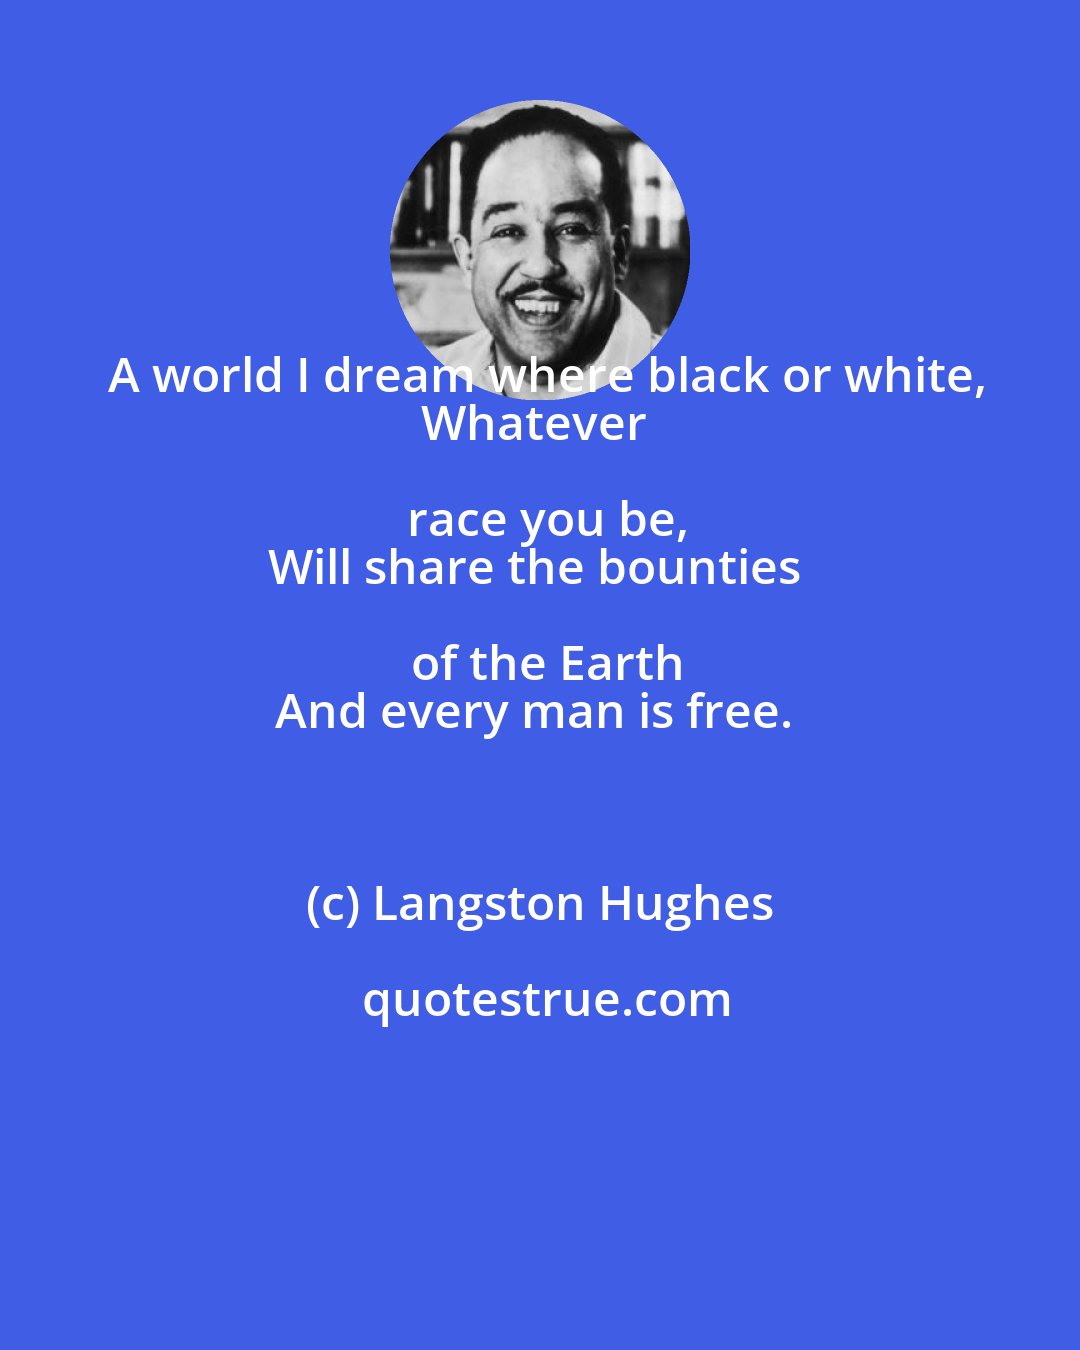 Langston Hughes: A world I dream where black or white,
Whatever race you be,
Will share the bounties of the Earth
And every man is free.